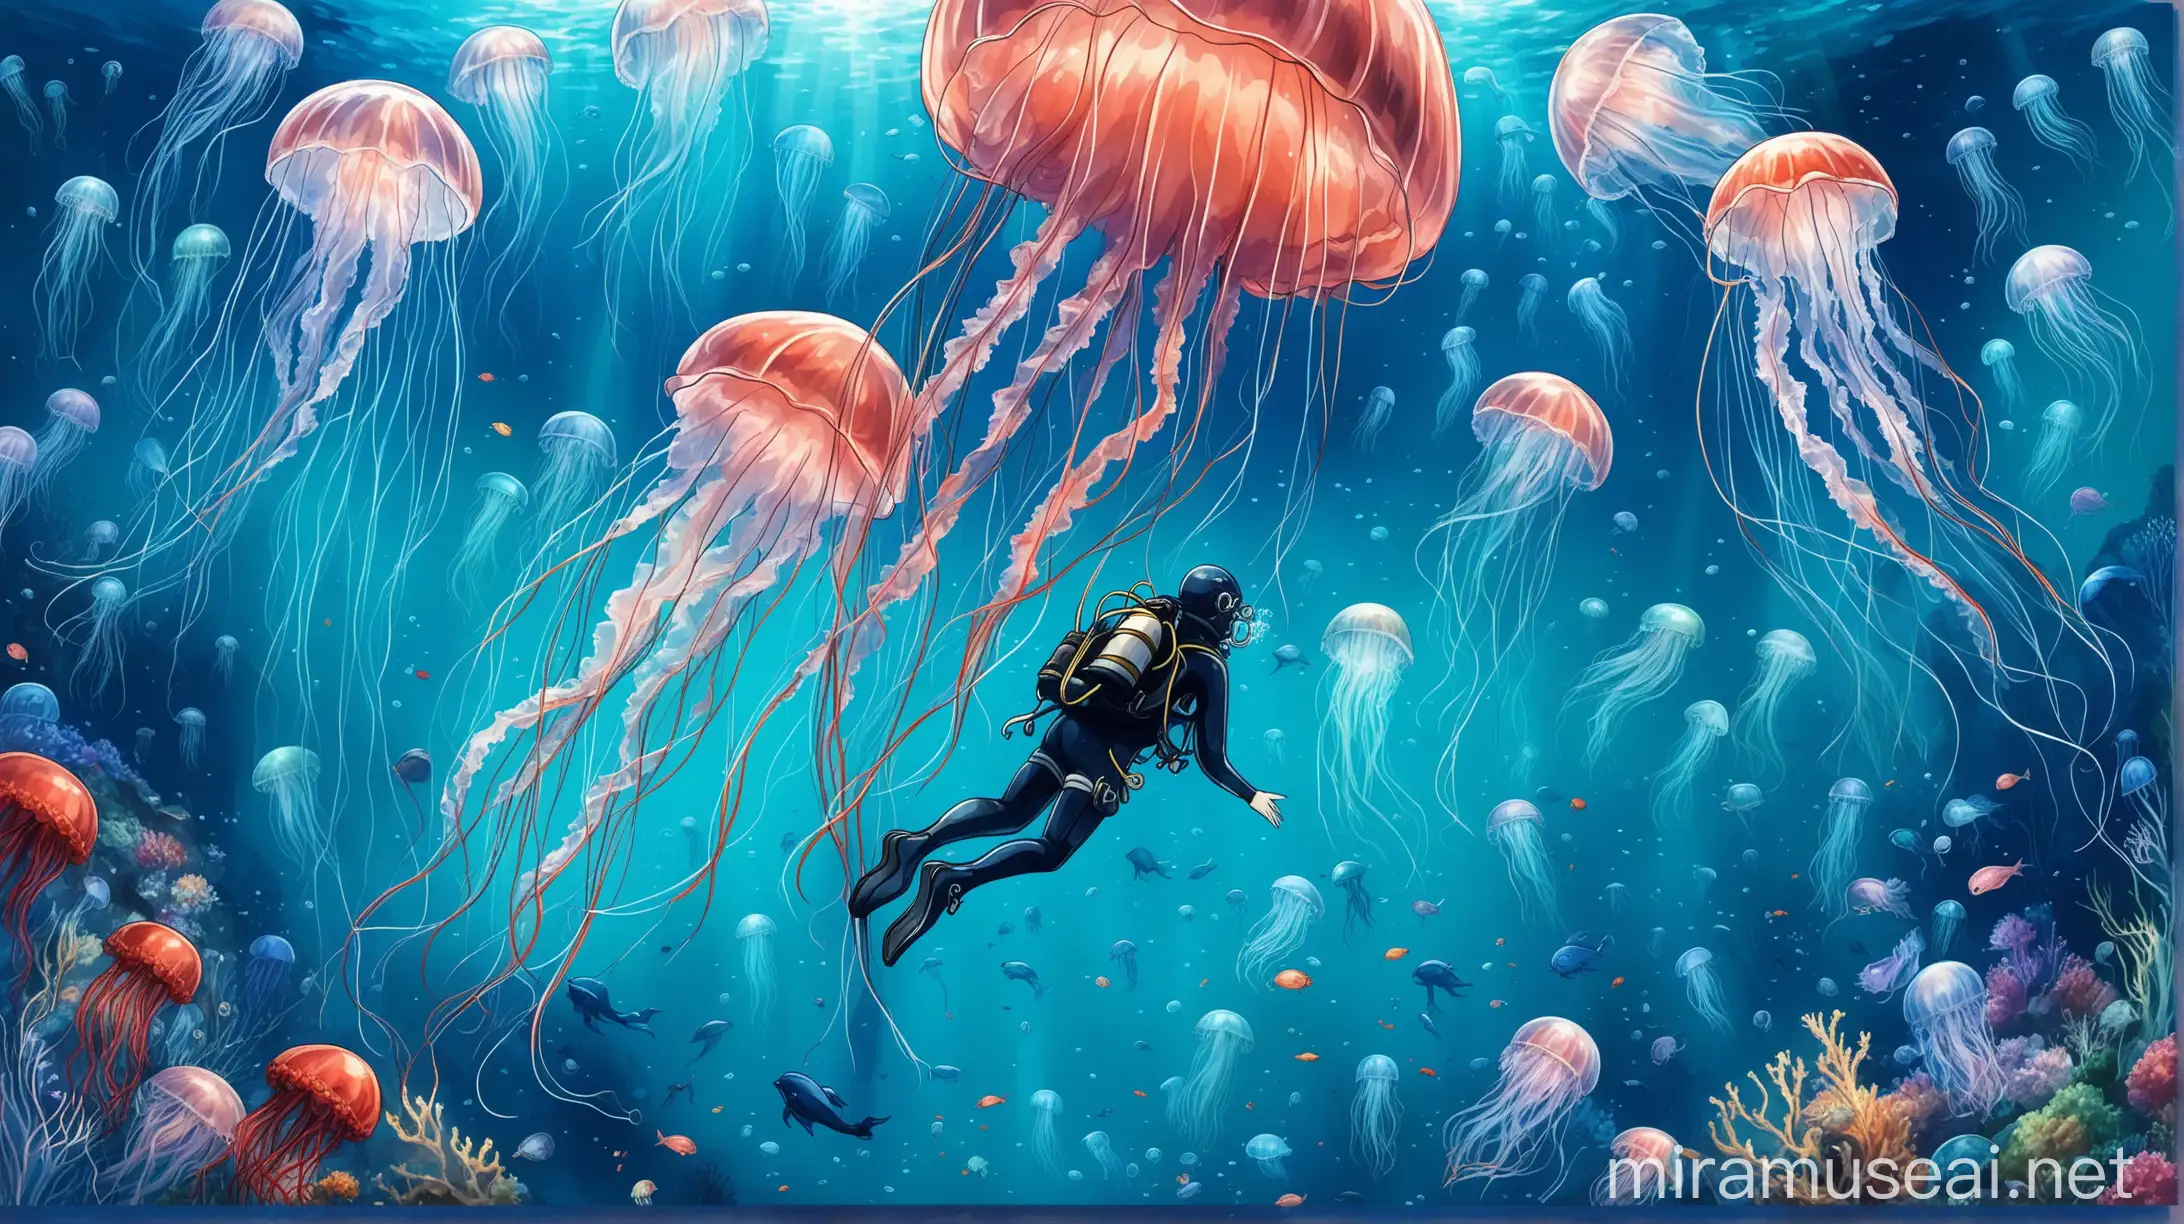 Anime Painting of Underwater Diver Surrounded by Jellyfish